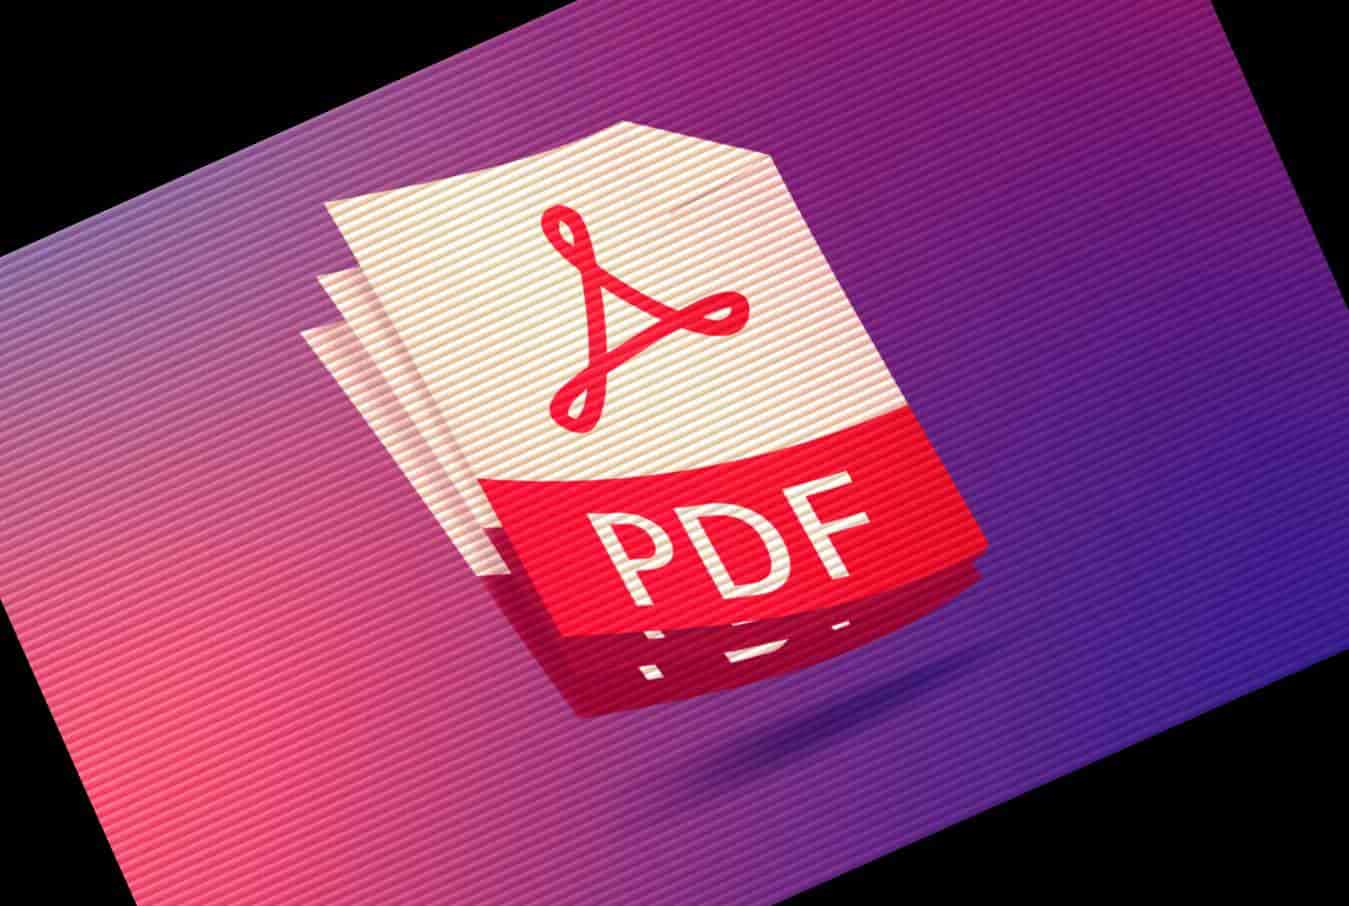 How to Edit Text in a PDF File: Tips and Tricks